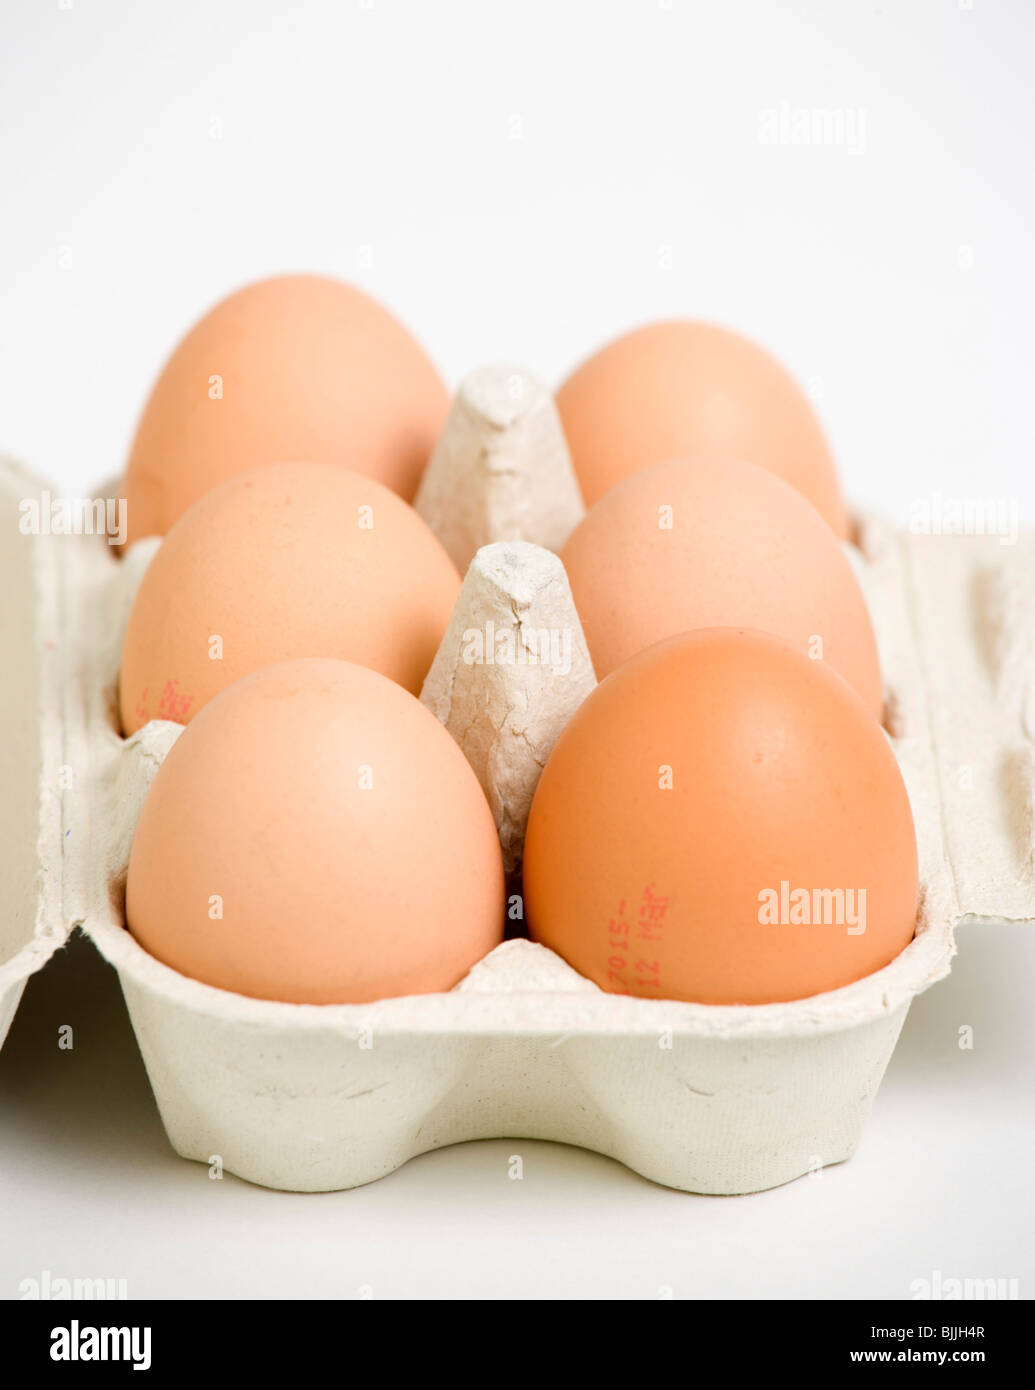 Food, Uncooked, Eggs, Box of six free range eggs on a white background. Stock Photo